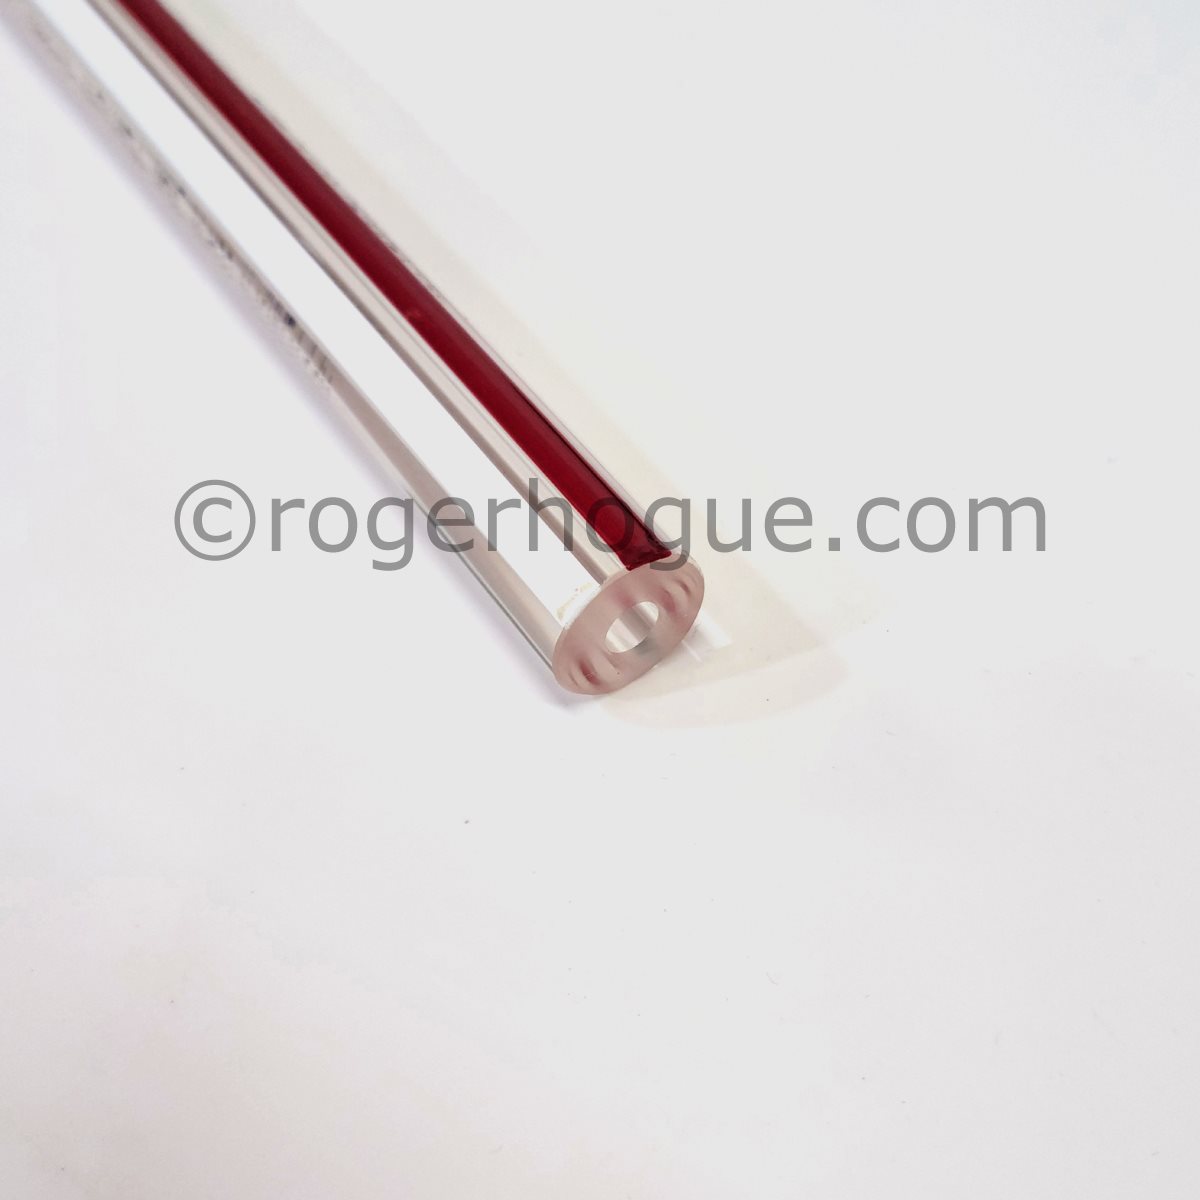 HEAVY WALL GLASS GAUGE 5/8'' X 48'' RED LINE 3/16'' THICK. WALL